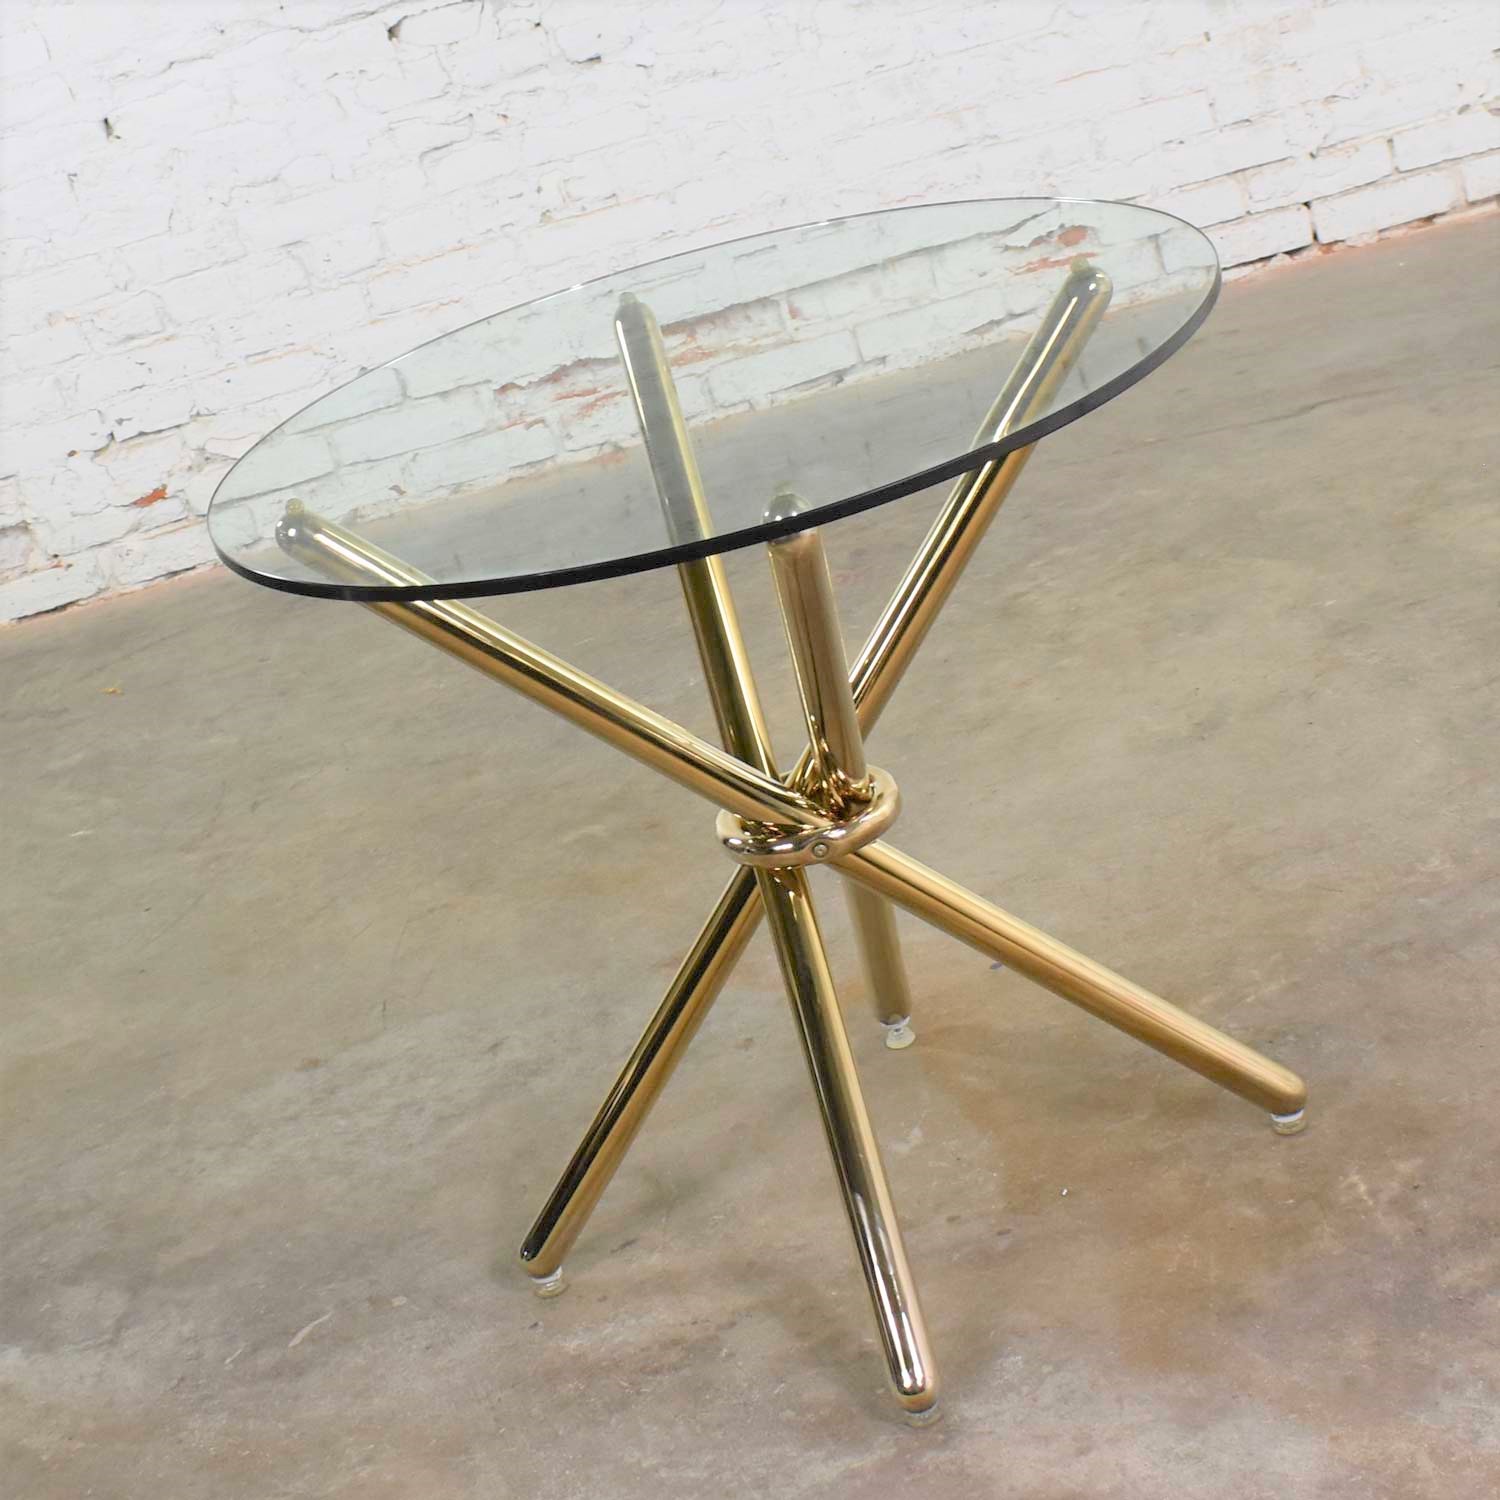 Vintage Modern Brass Plated Jax Center or End Table with Round Glass Top